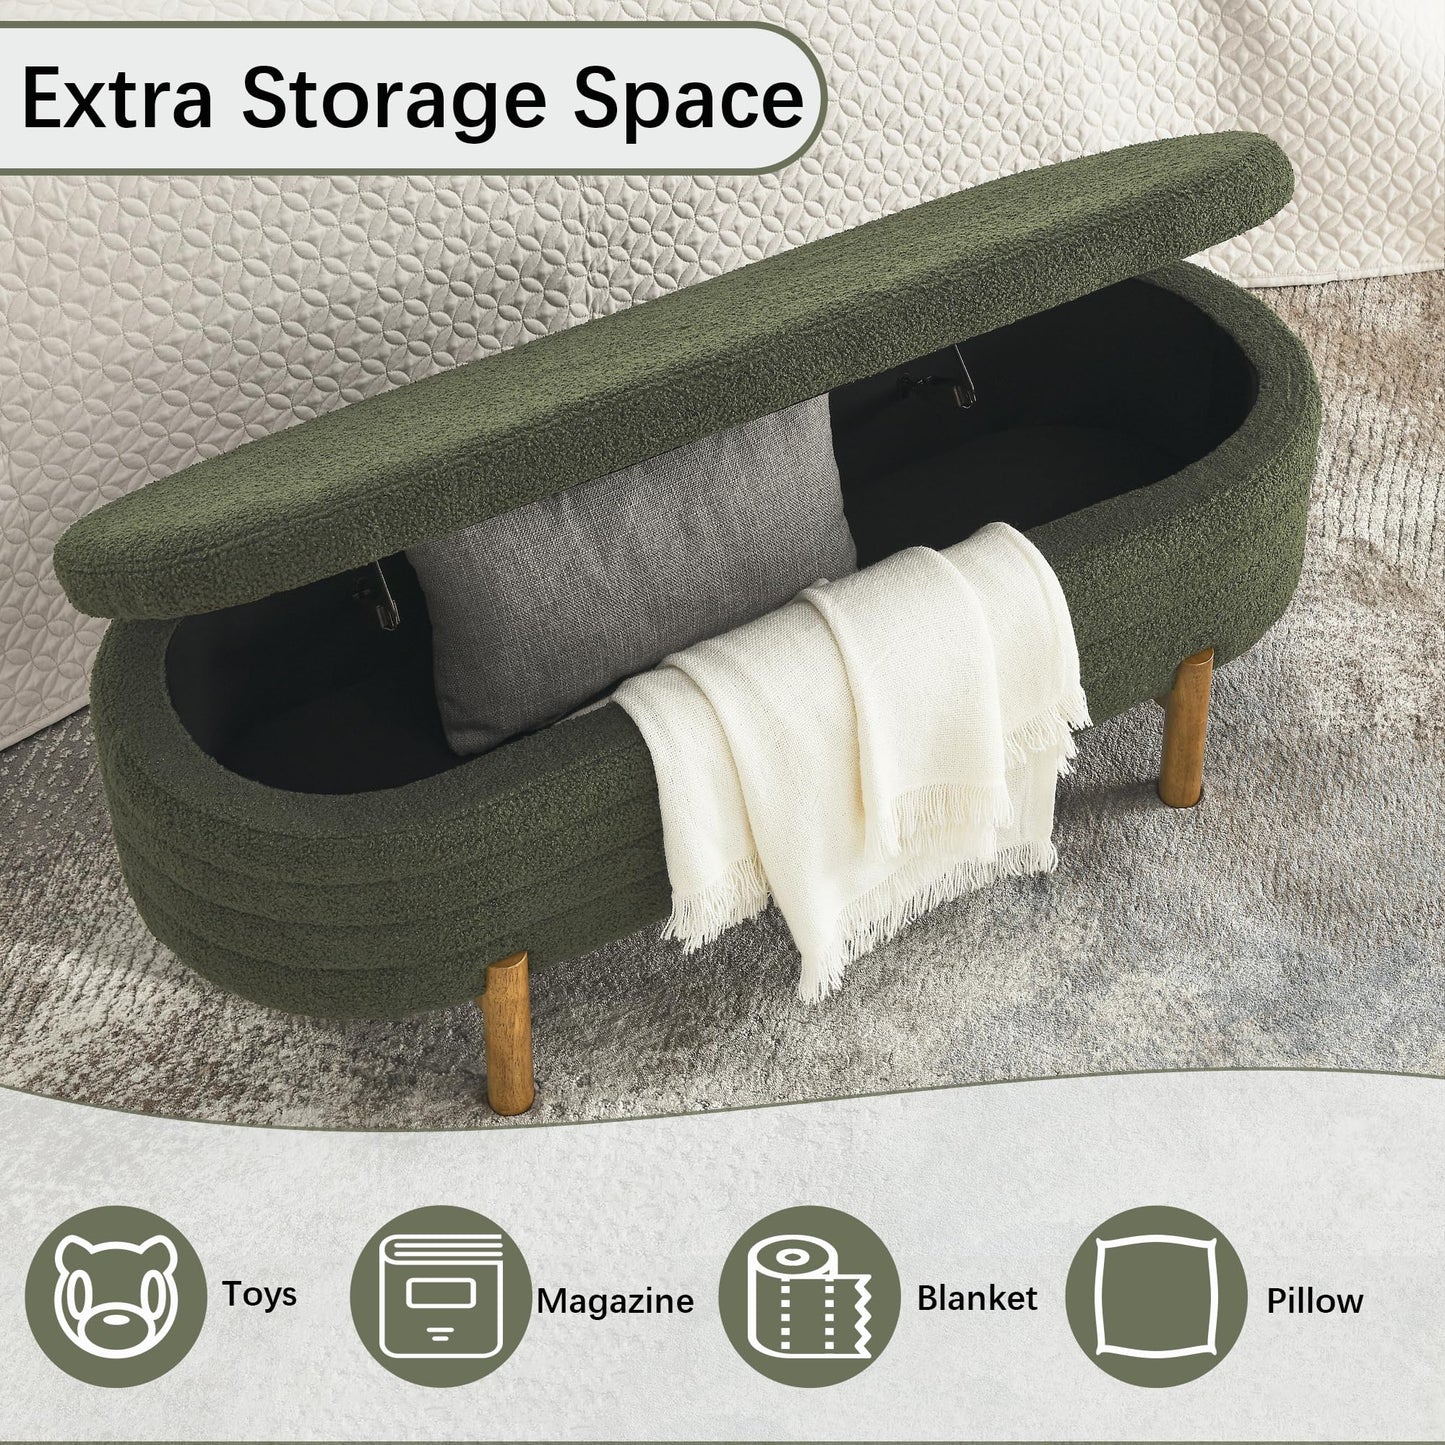 Niccae Teddy Velvet Oval Bedroom Storage Stool, Decorated and Soft Skin Friendly Teddy Fabric, Suitable for Entrance Benches, Living Rooms, Corridors, and Bed Ends (Green)